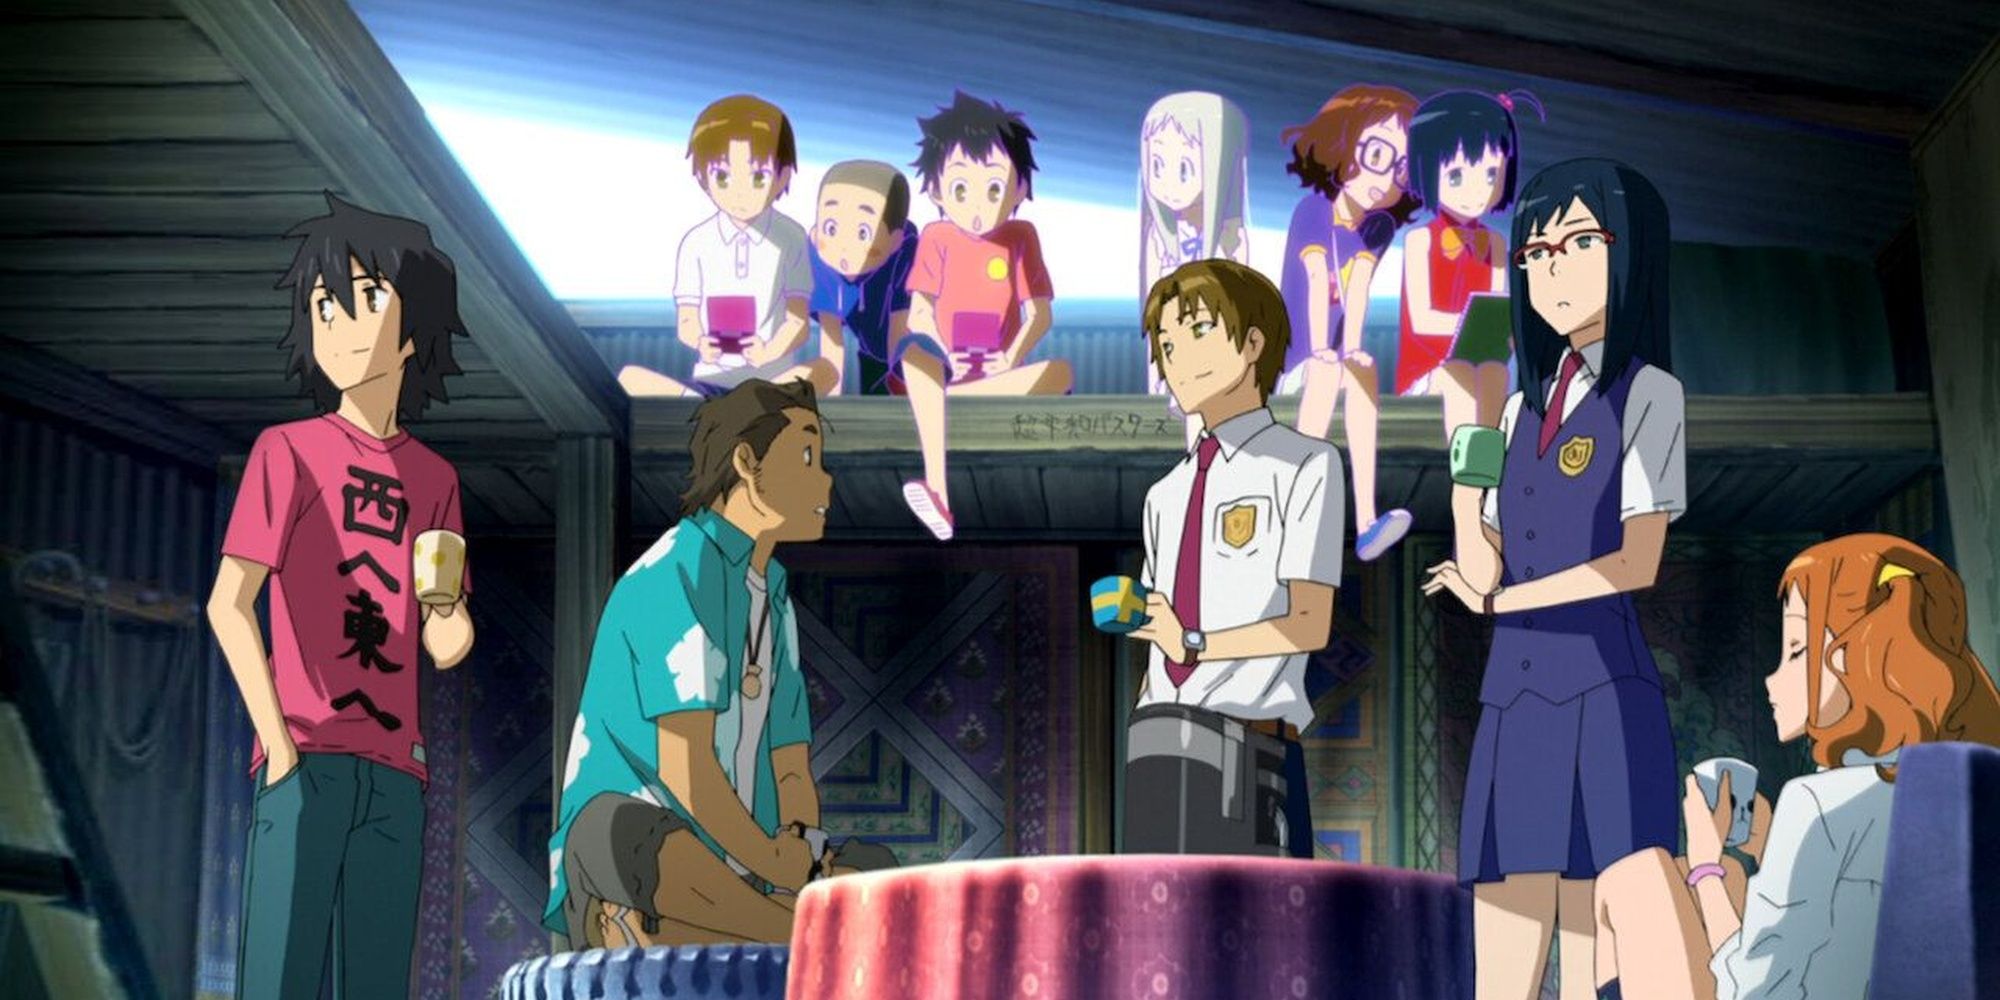 The five living members of the Anohana cast at their hideout, with their younger selves and Menma sitting over them.